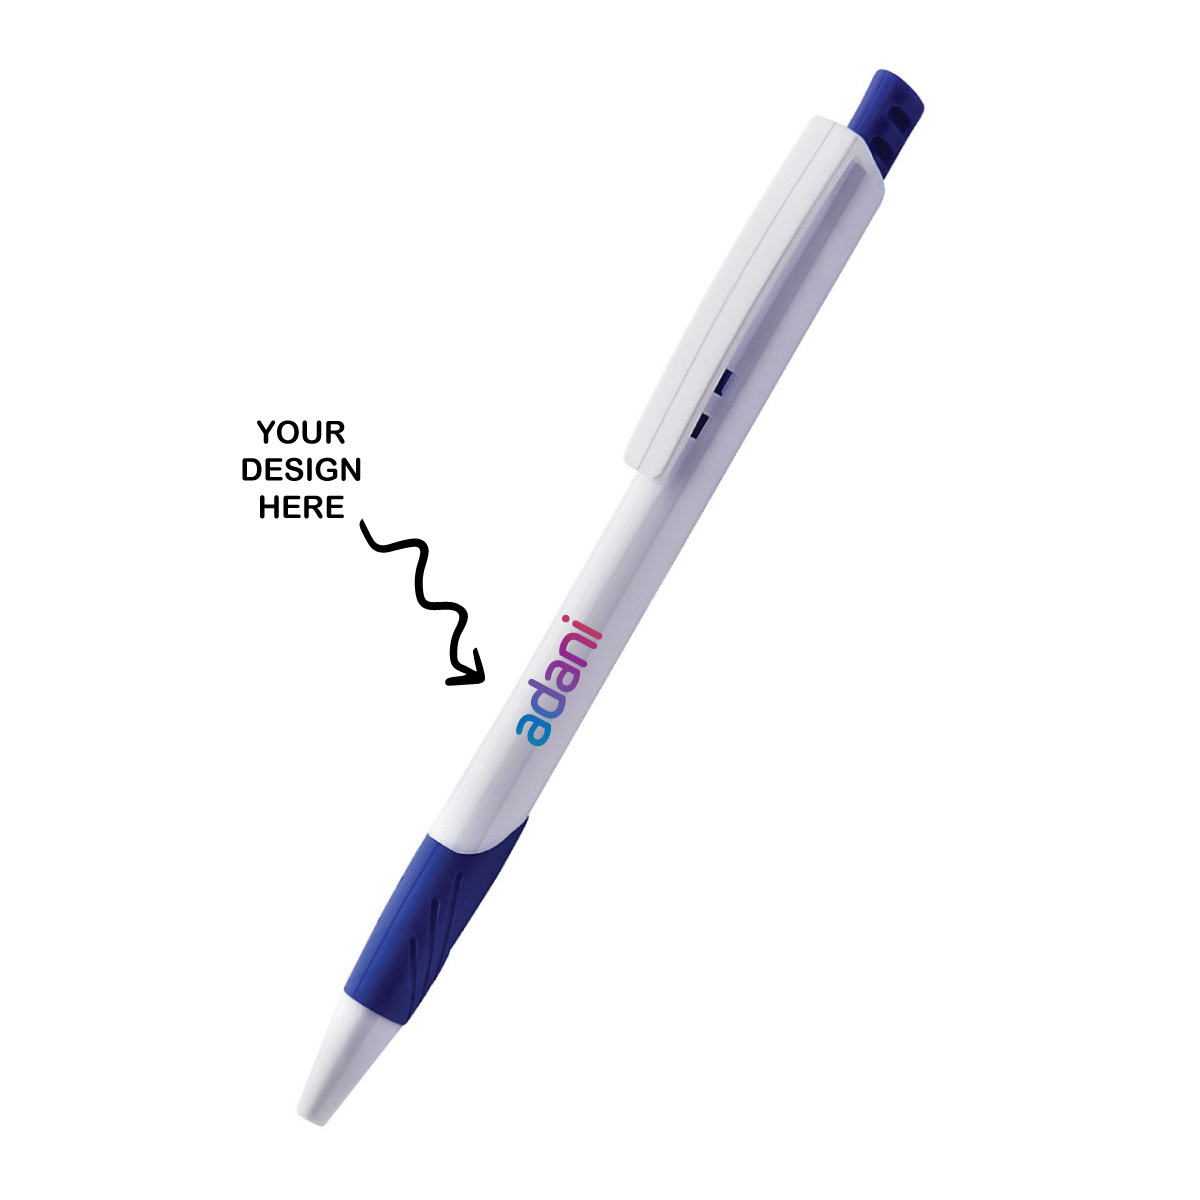 Personalized Plastic Ball Pen - For Corporate Gifting, Event or Exhibition Freebies, Promotional Item, Office Stationery JKP8